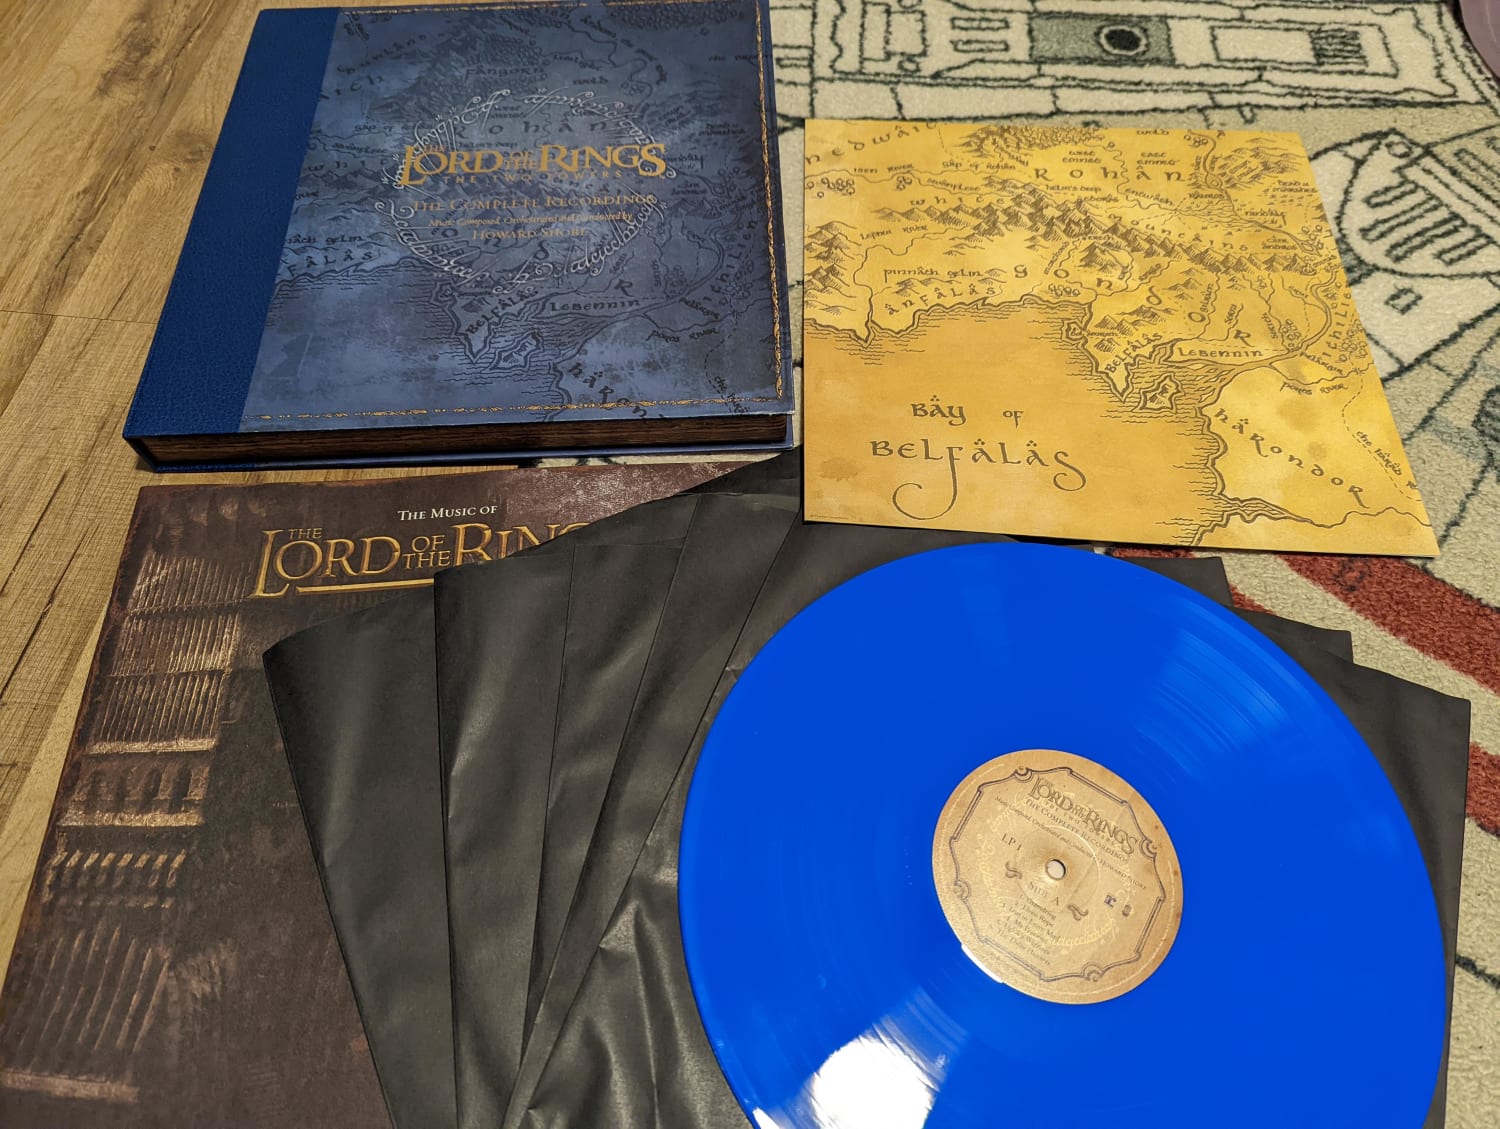 LotR: Two Towers (The Complete Recordings) acquired for $75